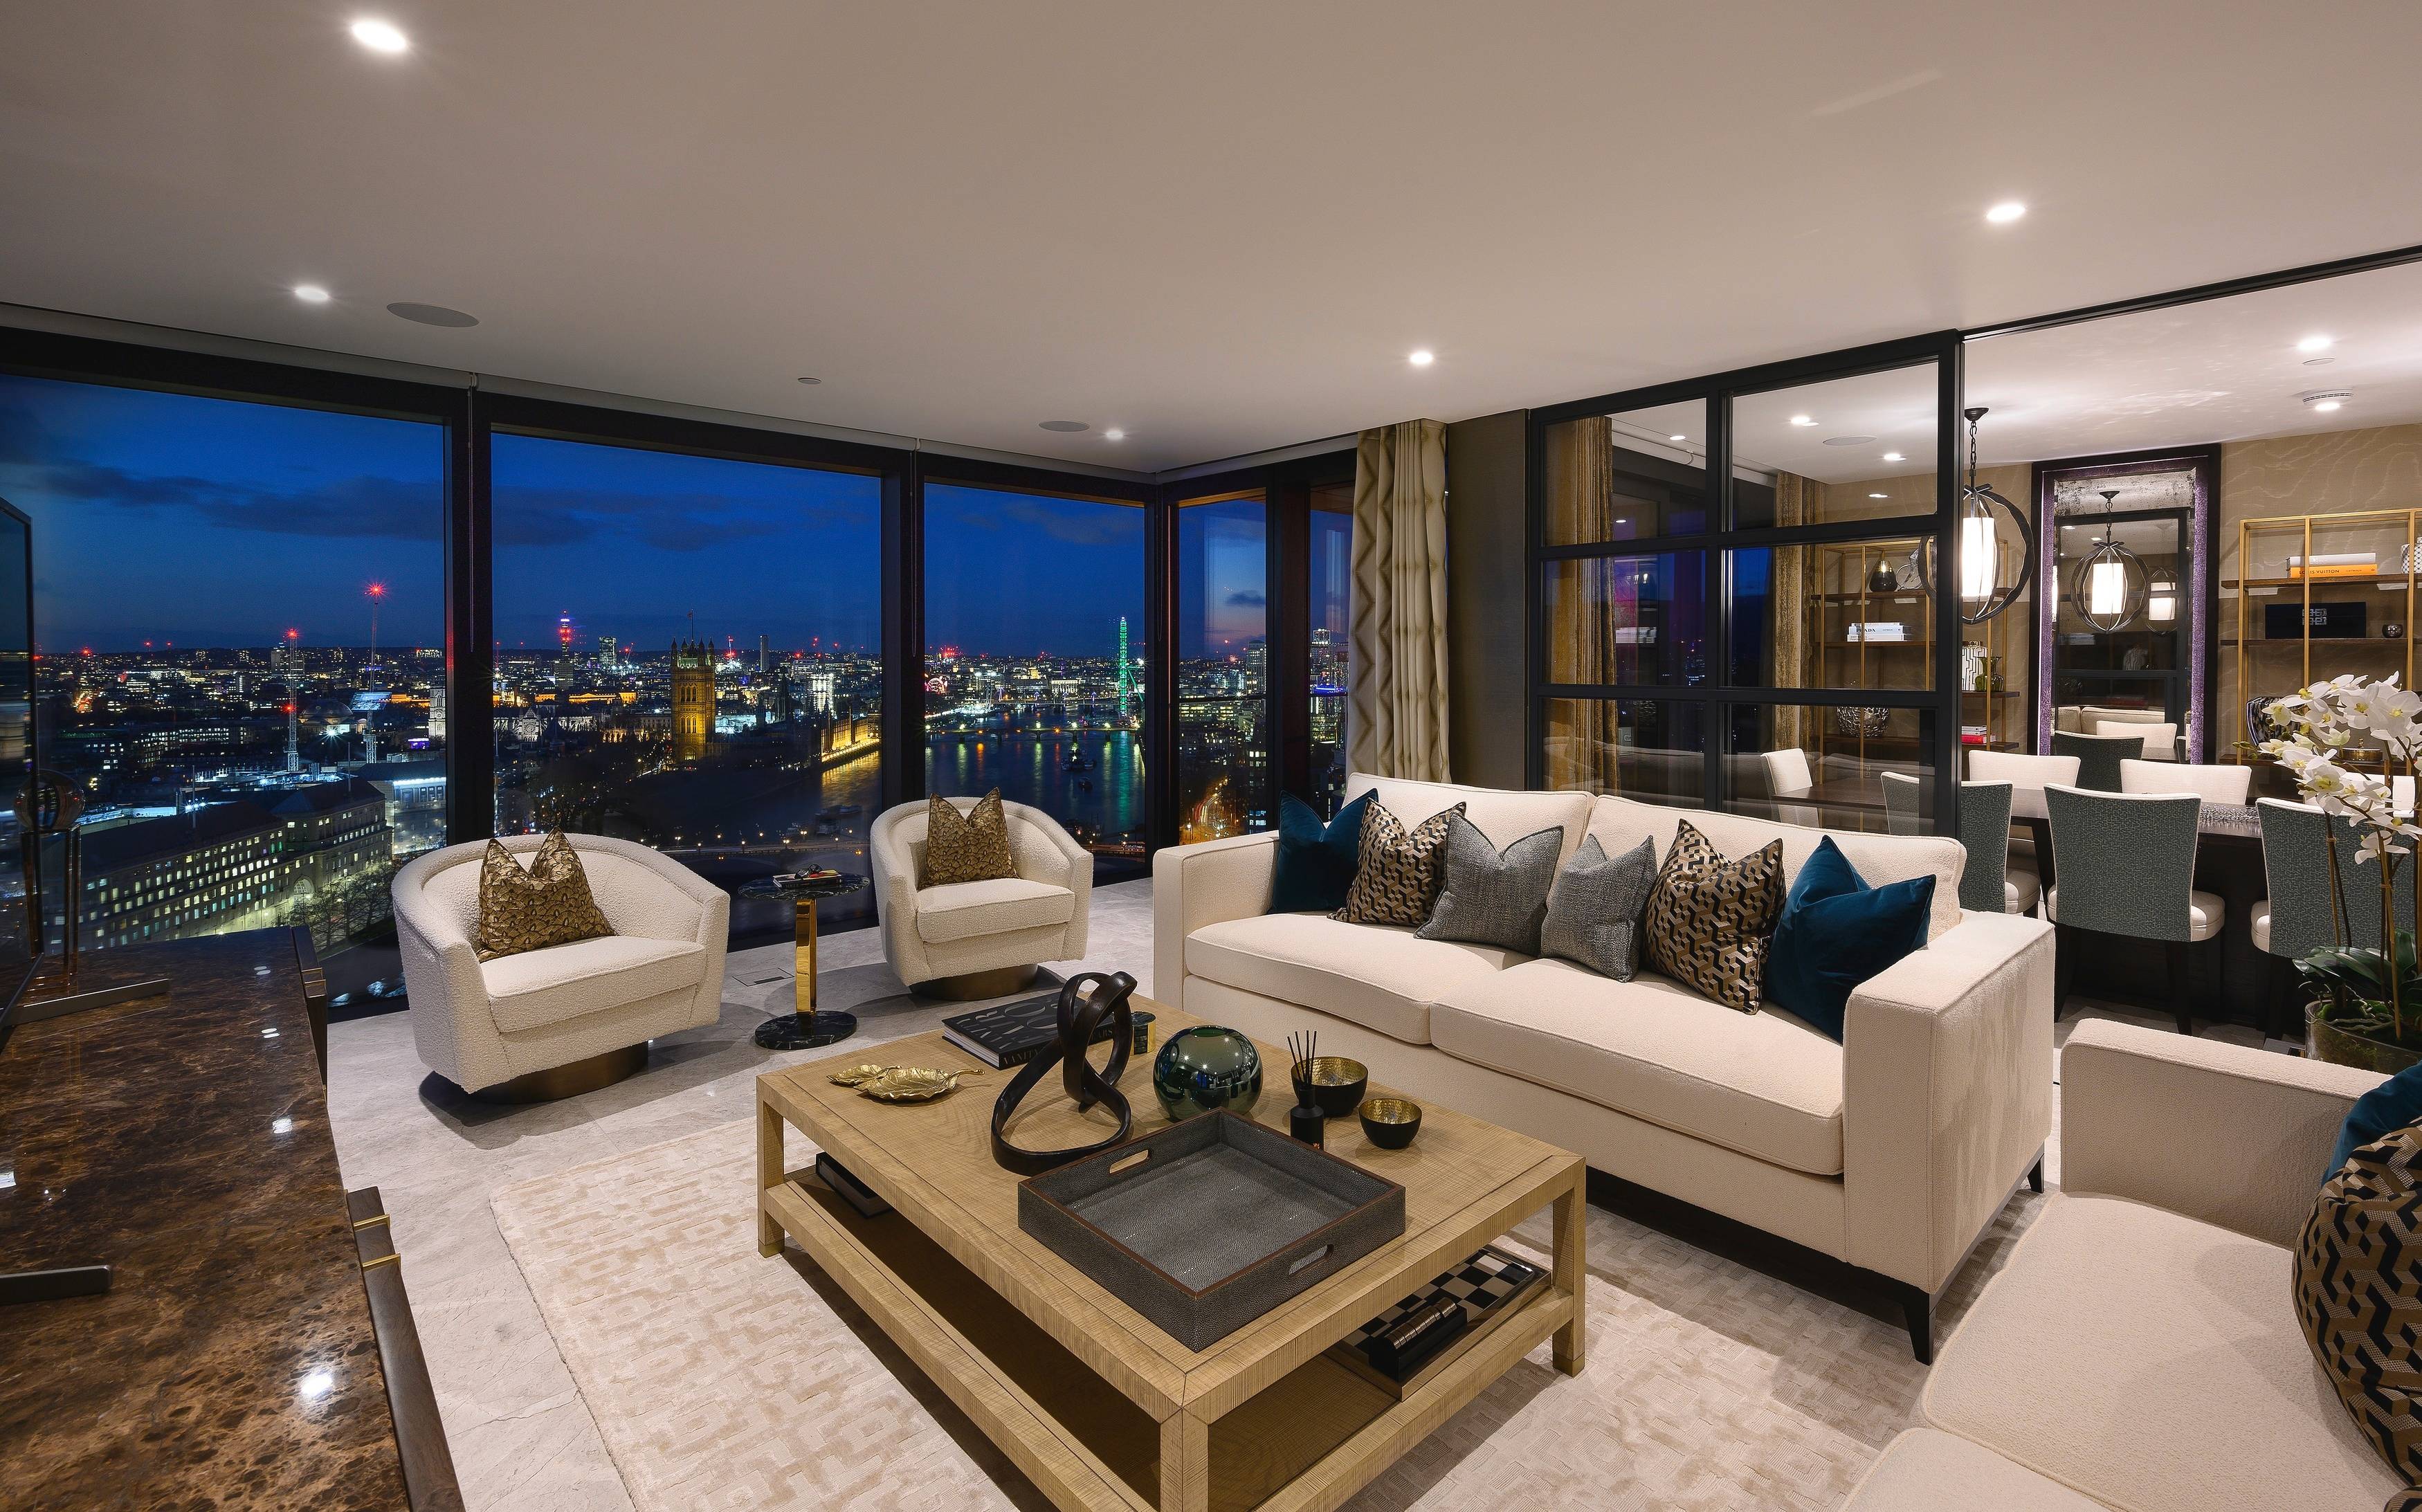 A stunning four-bedroom apartment occupying the entire 27th floor offers sensational 360-degree views taking in some of the most iconic landmarks in London.